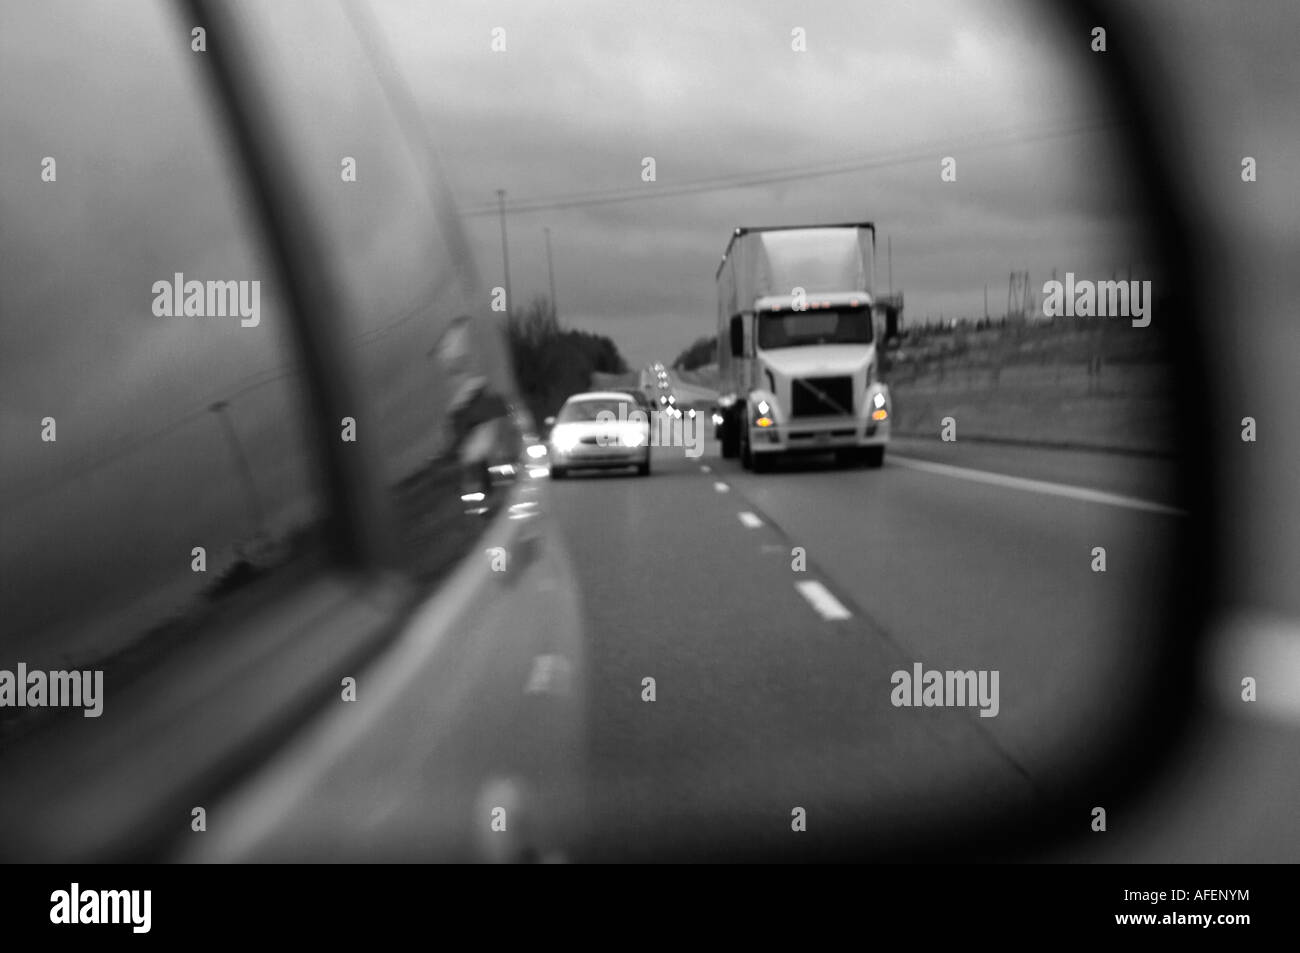 Cars and trucks in traffic on a United States Interstate Highway seen in a rear view mirror in mostly black and white Stock Photo